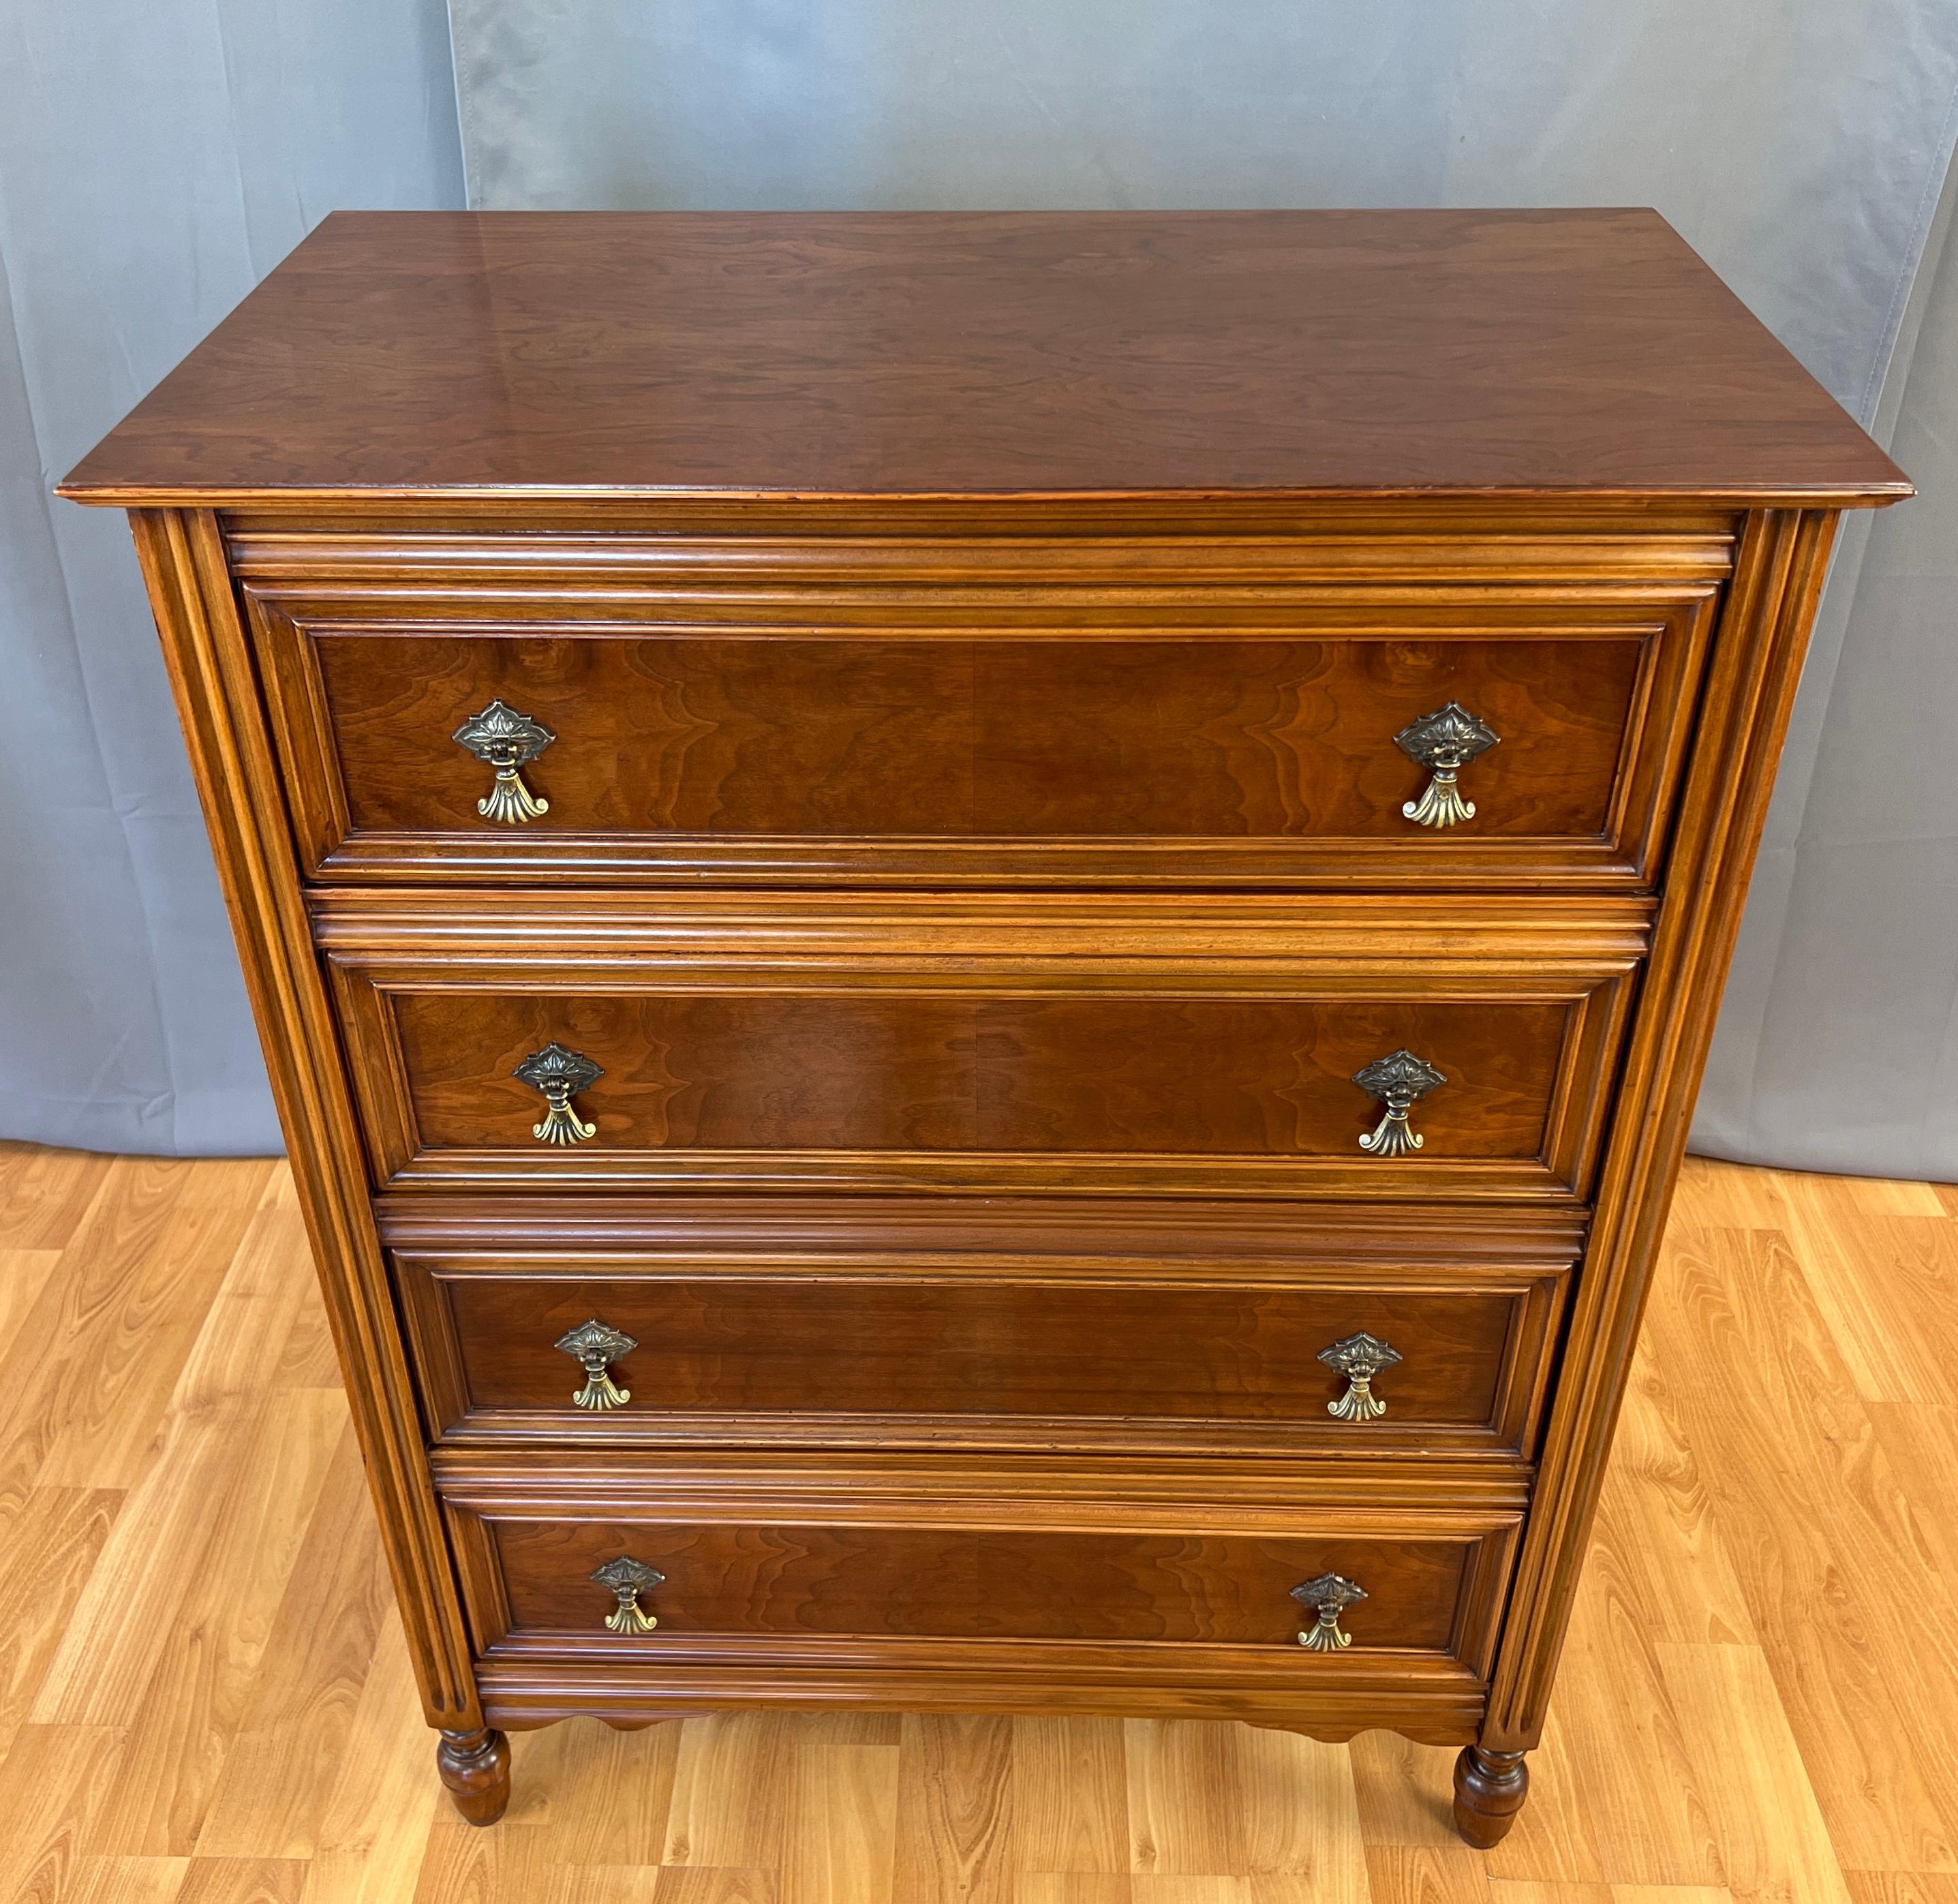 Offered here is a Charles P. Limbert Arts And Crafts Furniture Company produced highboy dresser.
Charles P. Limbert was known for making well crafted furniture, mostly their Arts and Crafts line, around 1916 they started producing other “original